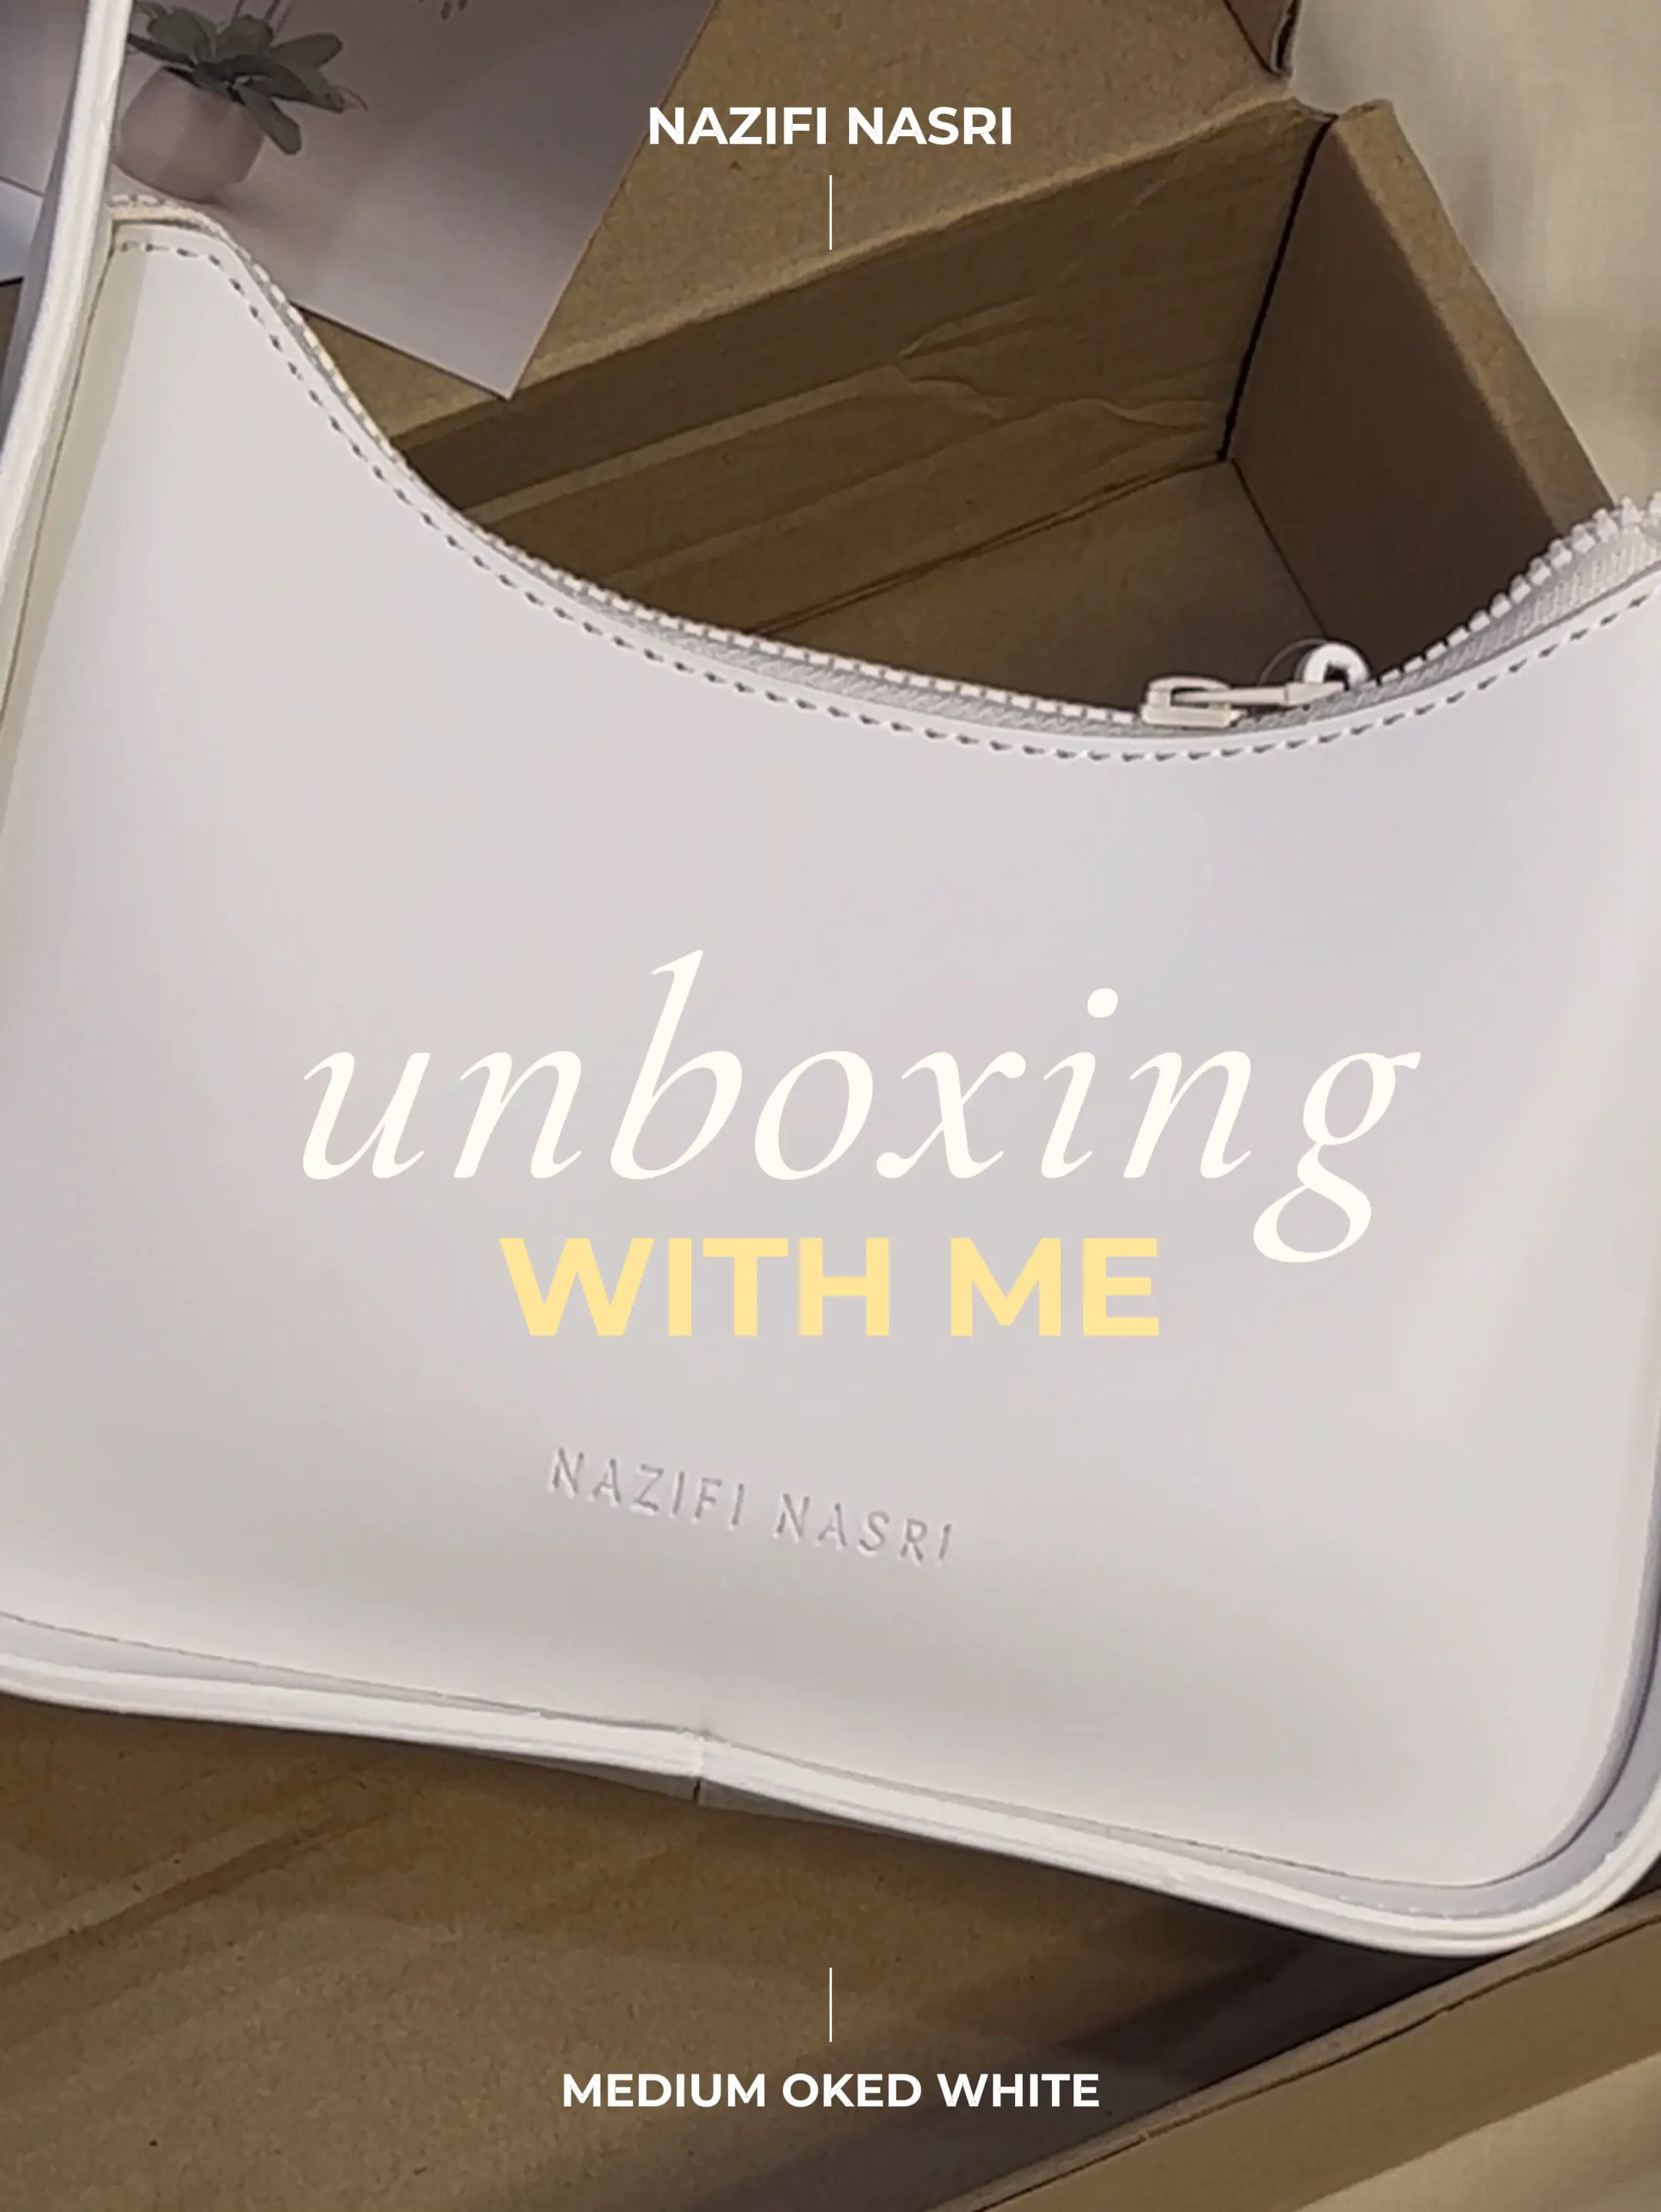 UNBOXING the Newest Louis Vuitton bag #luxury #fashion